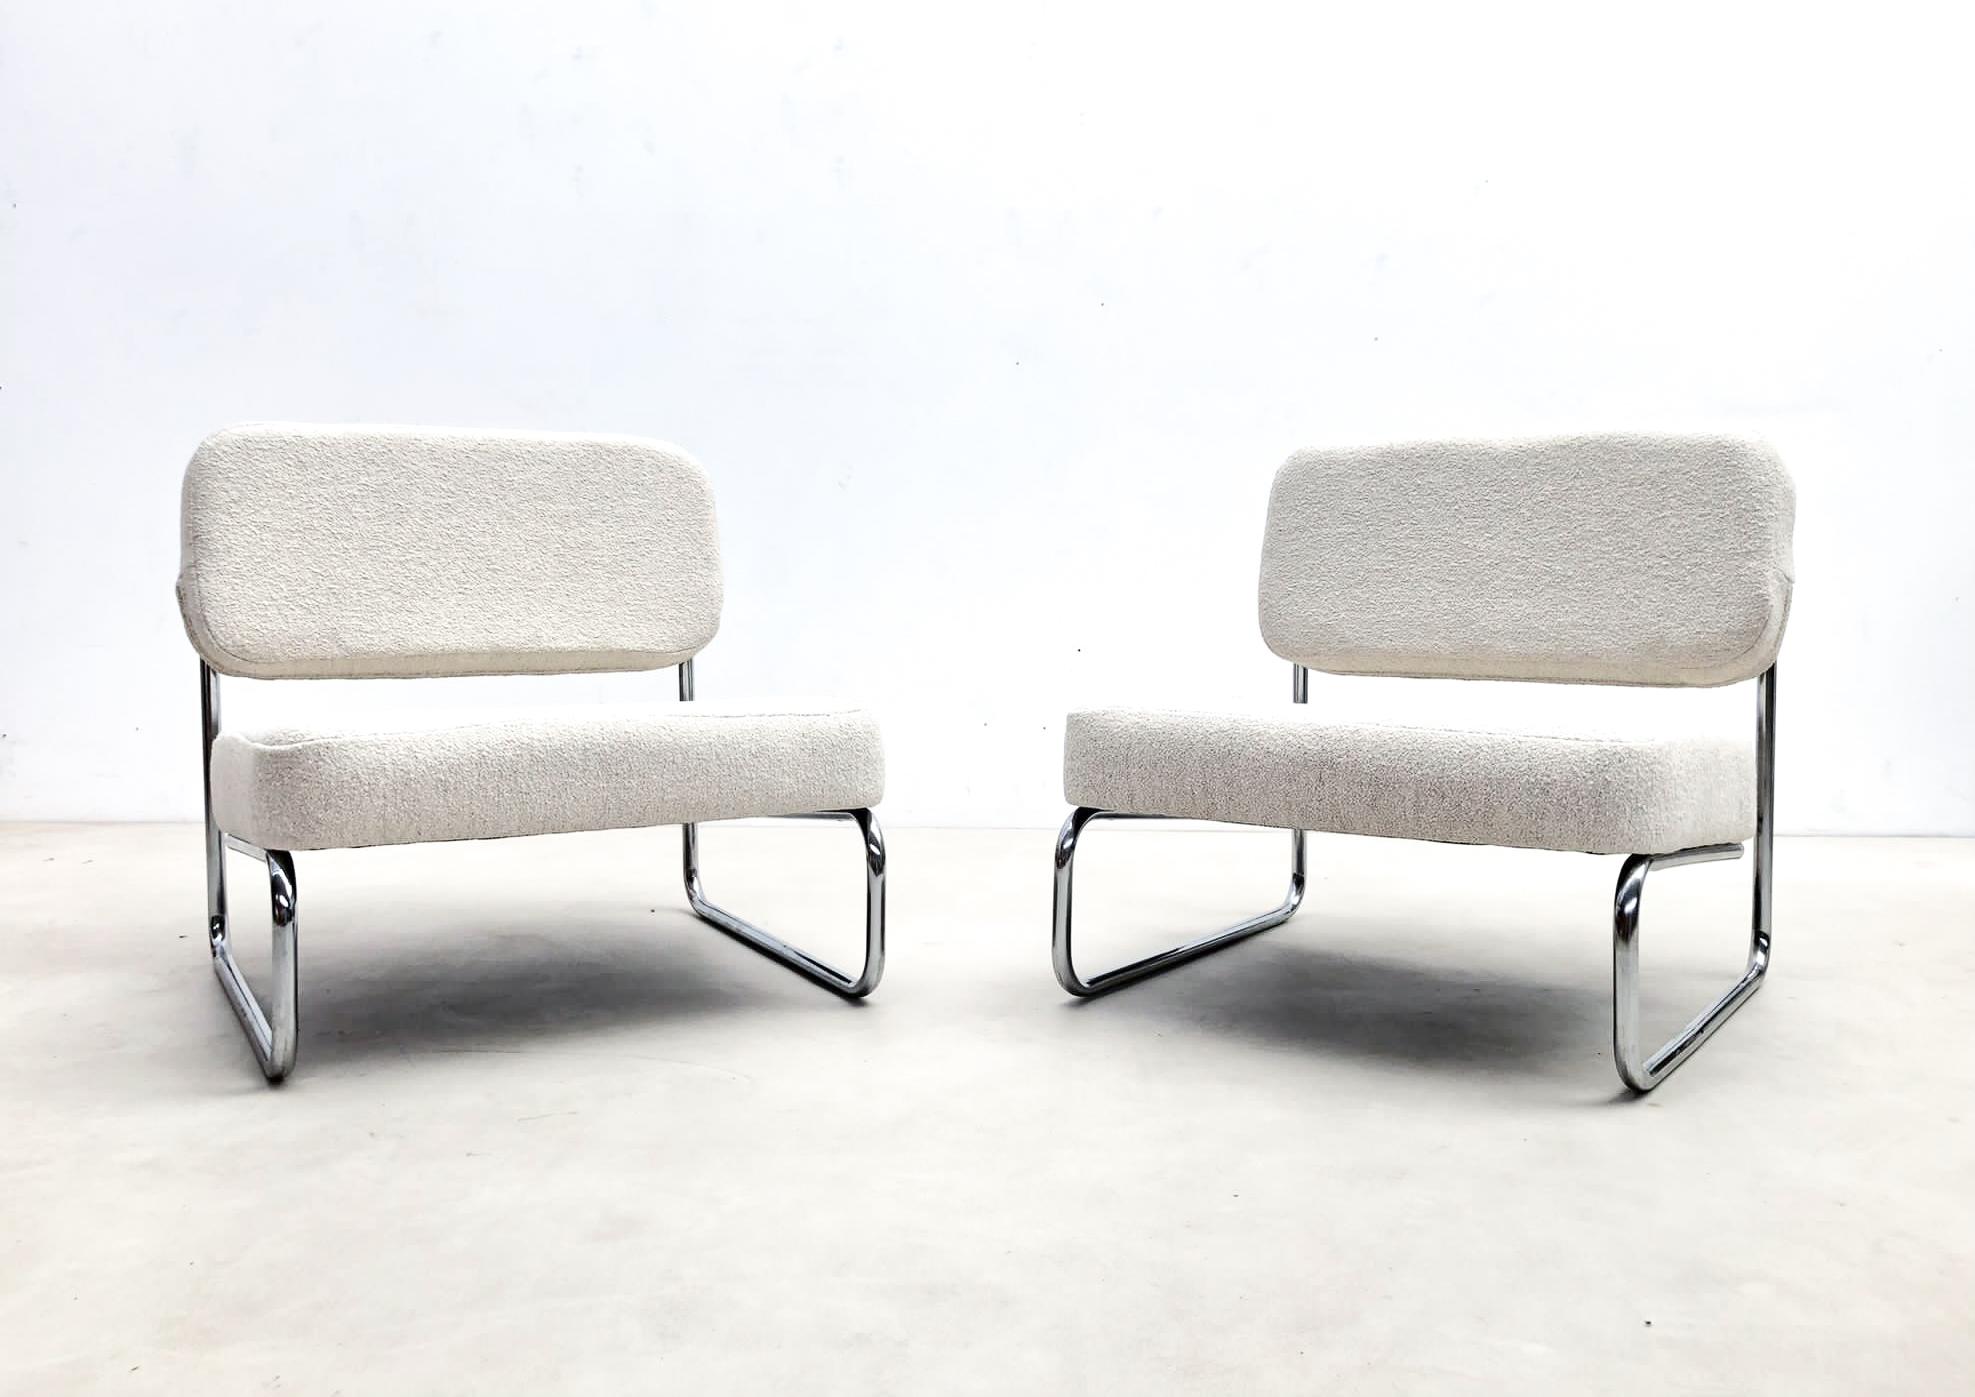 Mid-Century Modern pair of chairs, France, 1960s - new upholstery.